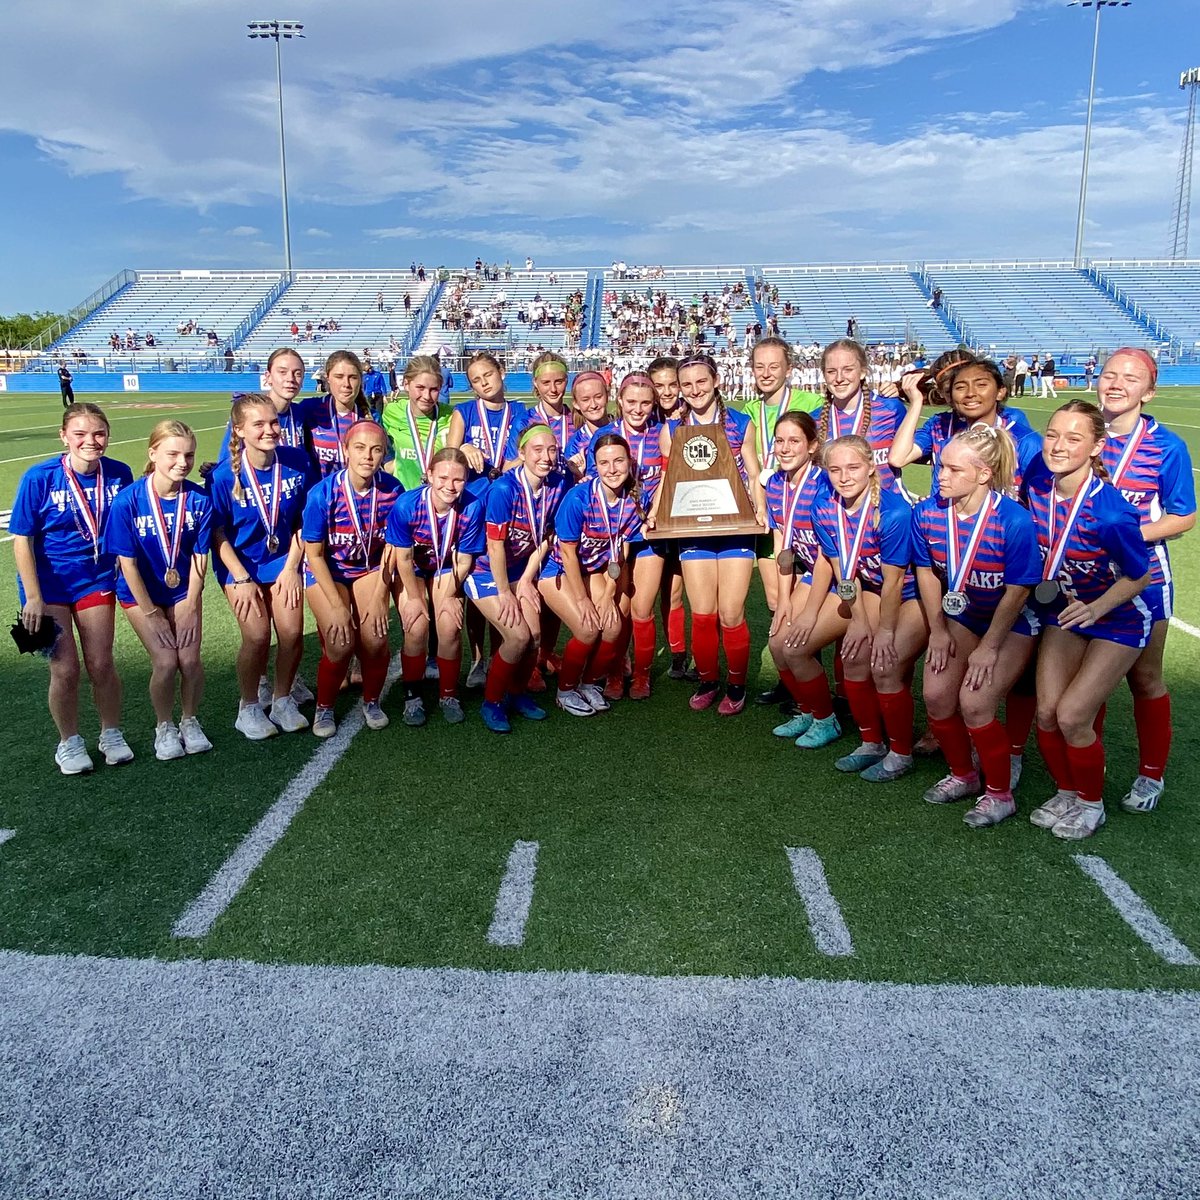 Women’s Soccer finished the season with 17 wins, 5 losses, 2 ties and 11 shutouts. The Chaps won the Region IV Championship with shutout wins over Harlingen and Taft and returned to the state finals for the first time since 1996. This team made history. #GoChaps